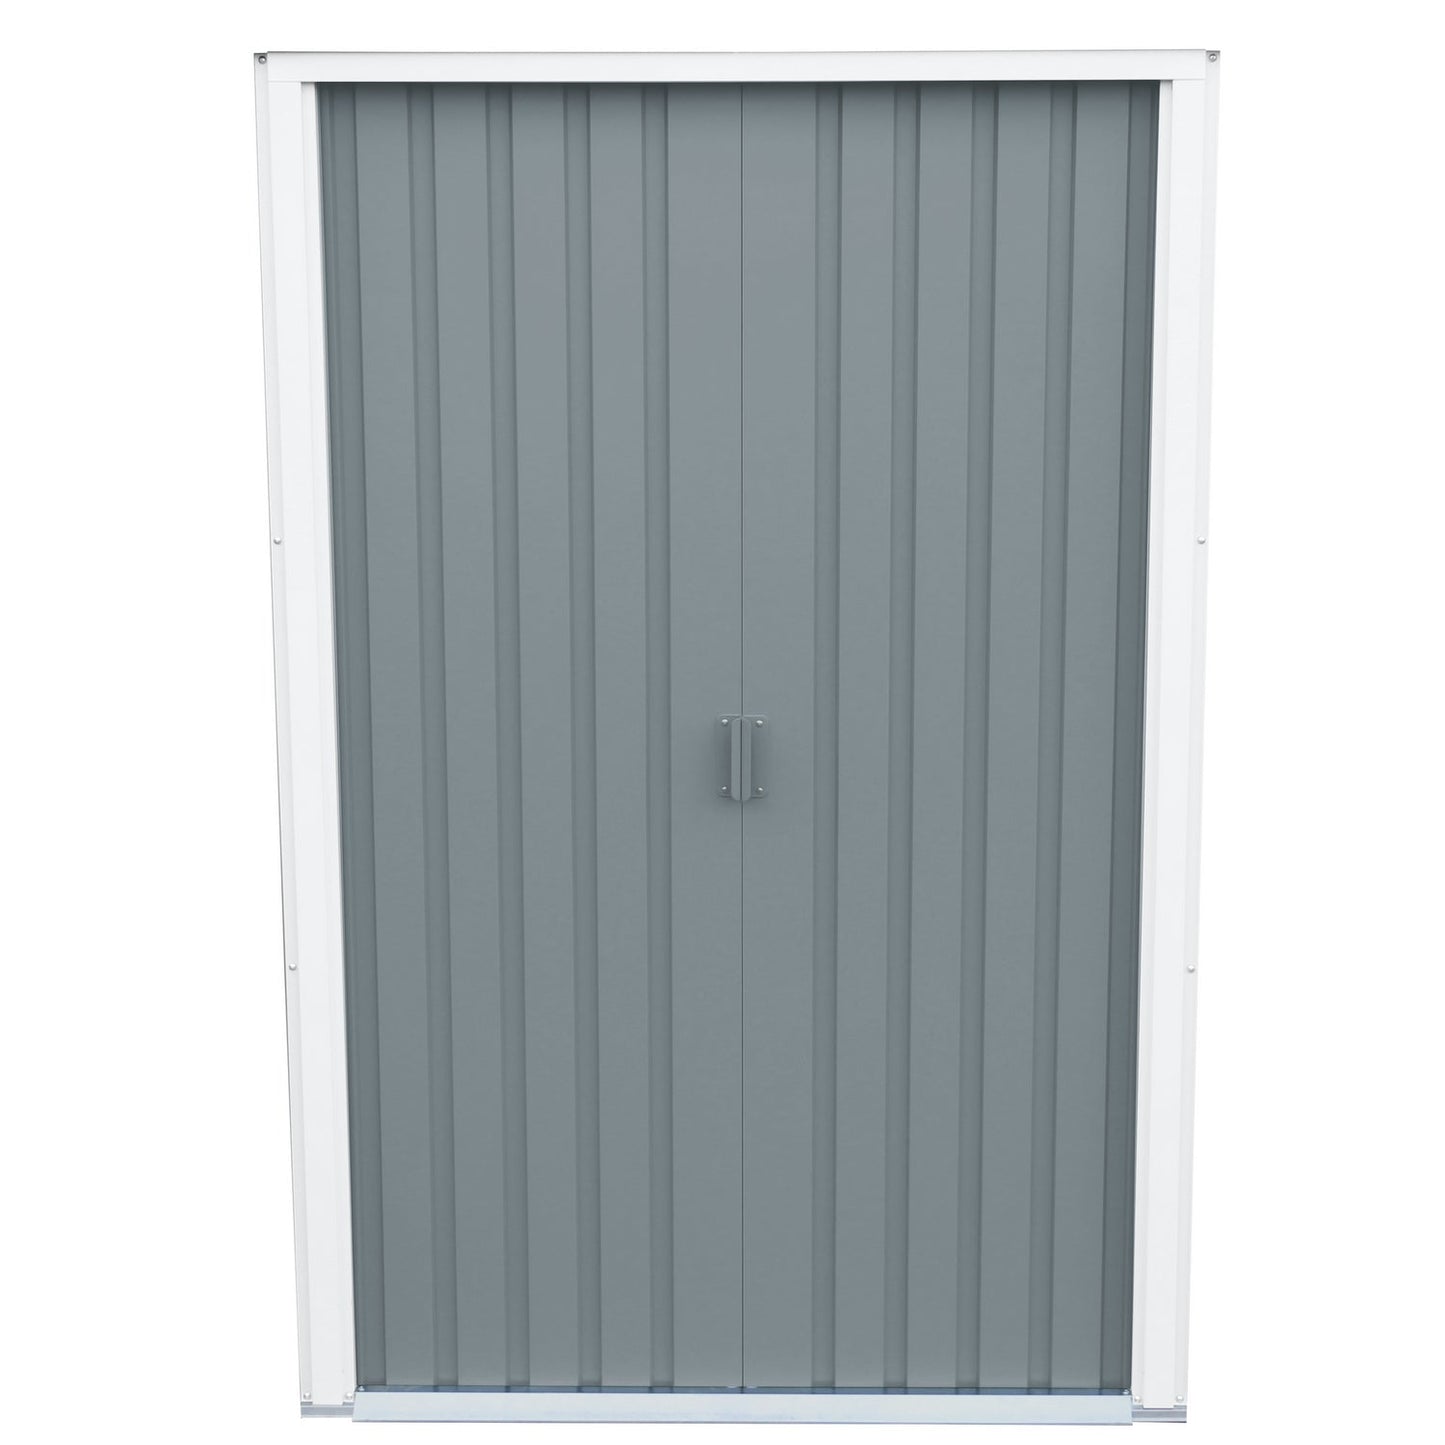 DuraMax | 8x6 ft Top Pent Roof Metal Storage Shed With Skylight - Light Gray